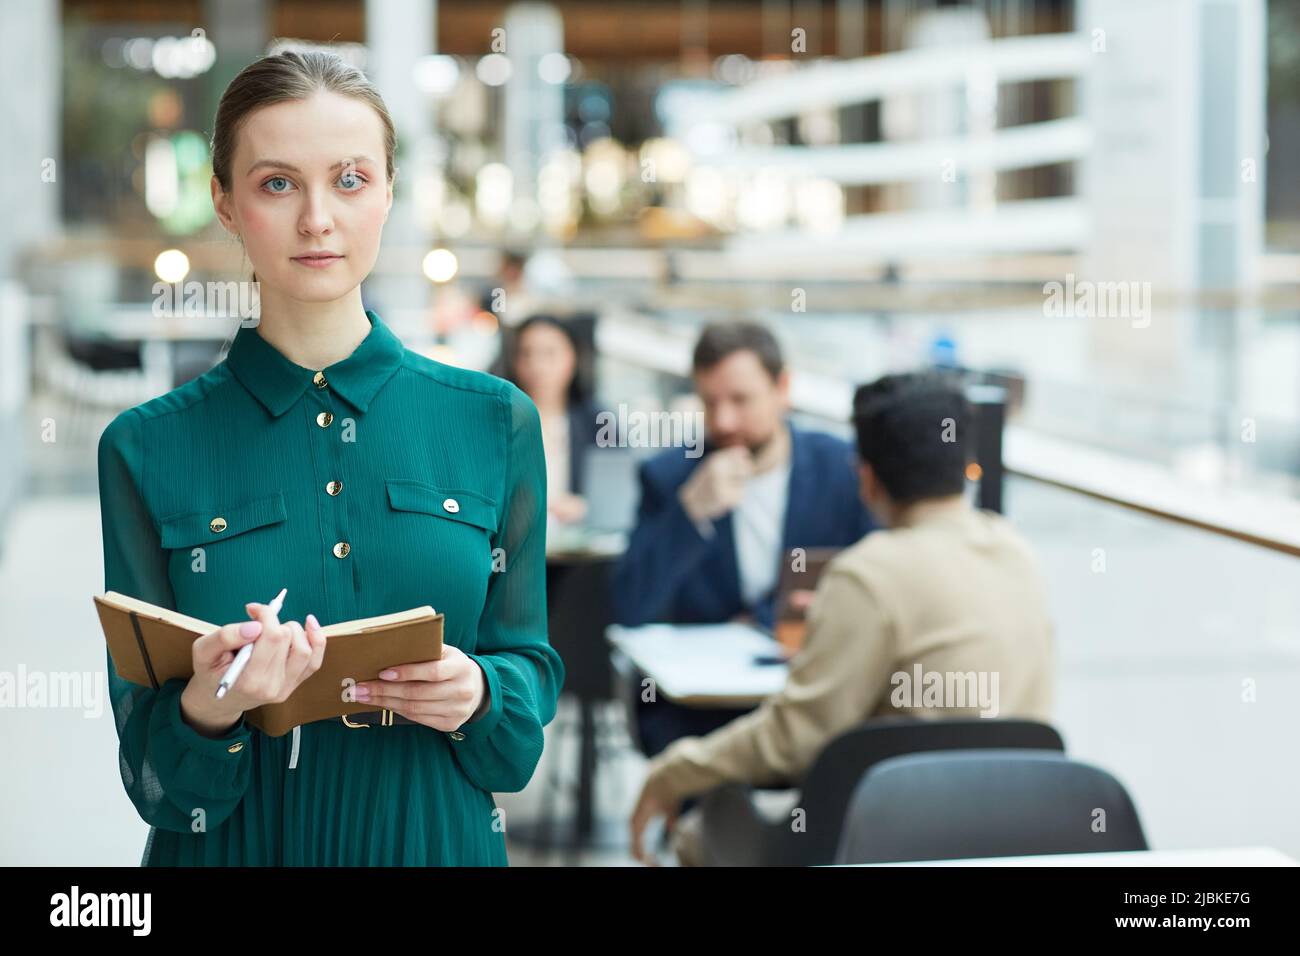 Waist up portrait of young businesswoman holding planner and looking at camera in office building interior, copy space Stock Photo